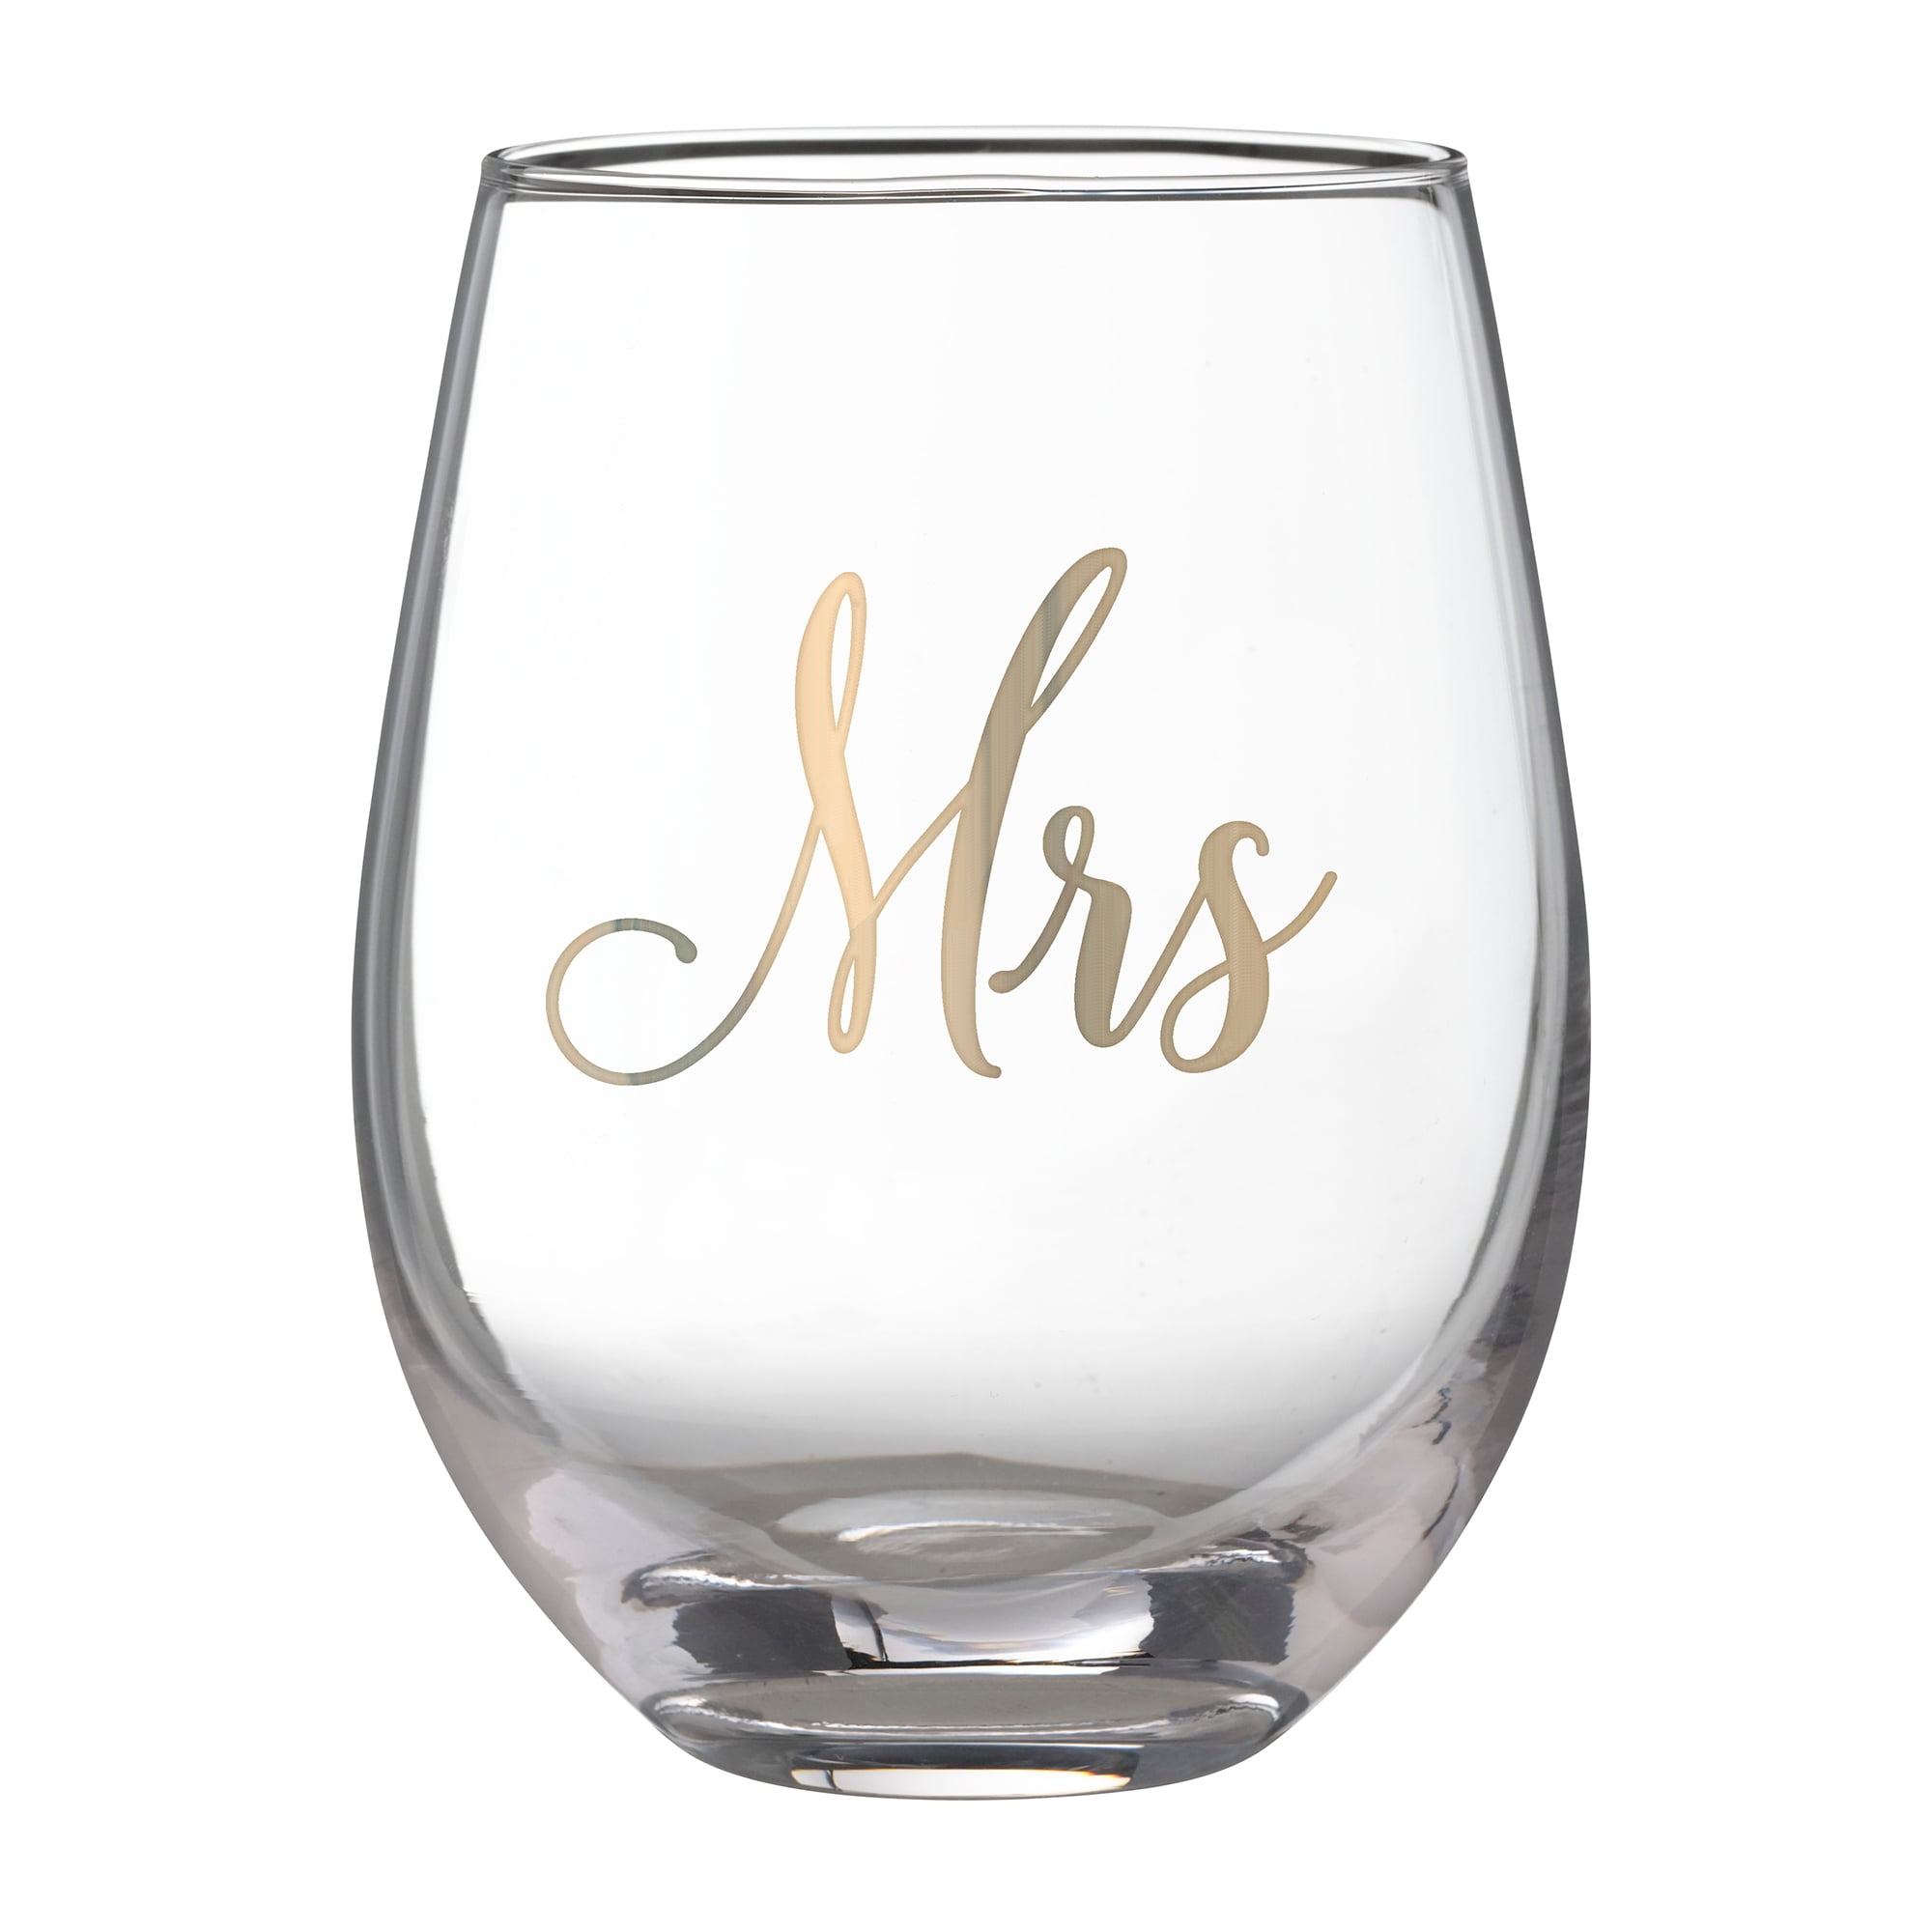 10 oz Wine Glass Goblet Wedding Bride Will you be my Bridesmaid?